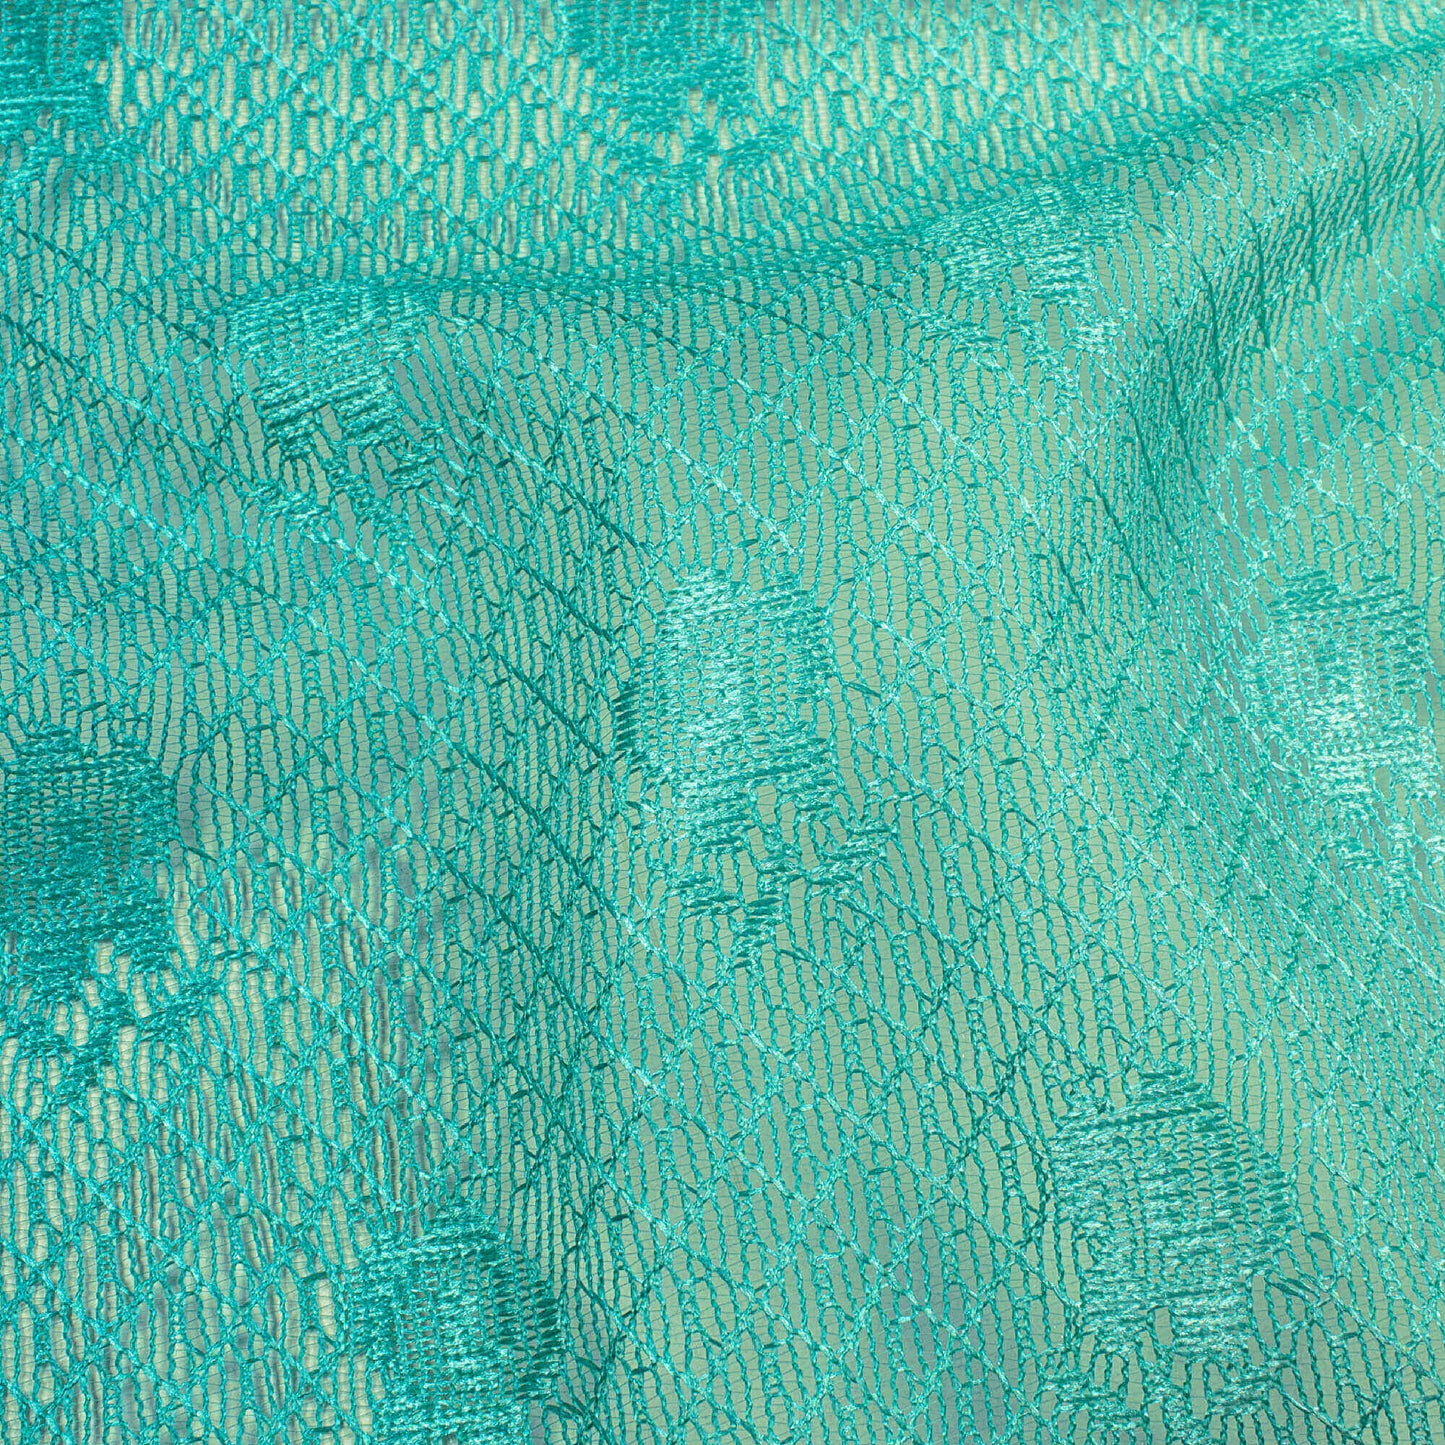 Teal Blue And Mint Green Ombre Pattern Digital Print Booti Raschel Net Fabric (Width 58 Inches)